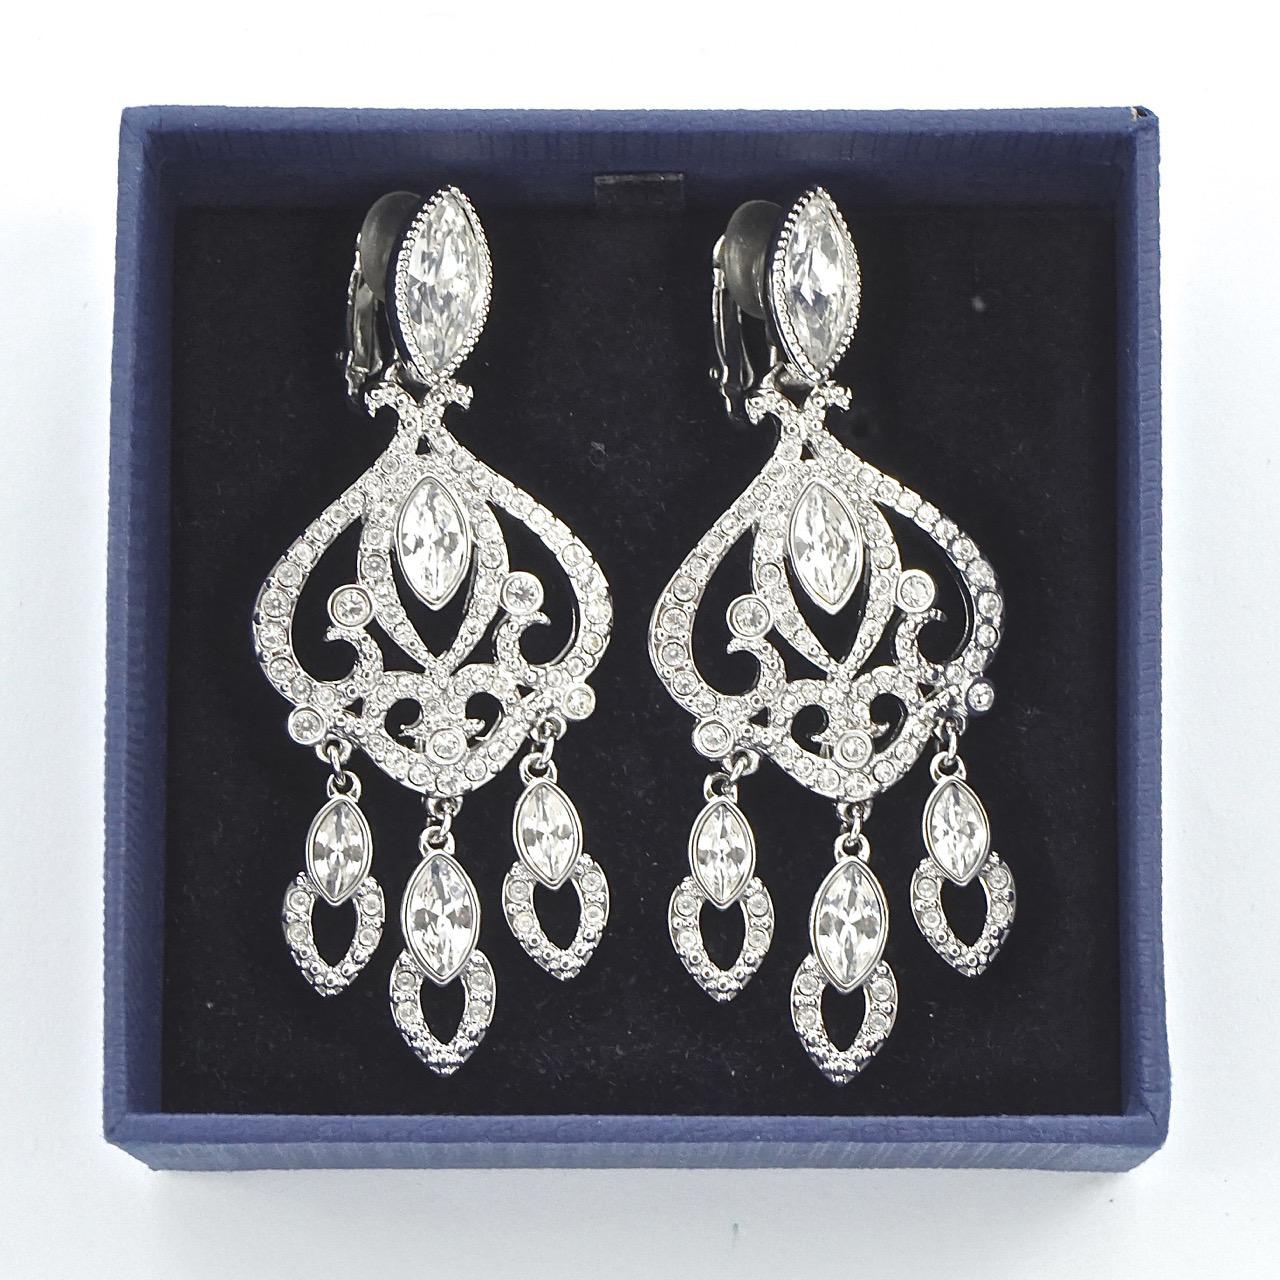 Swarovski Silver Tone Marquise and Round Crystal Swan Logo Chandelier Earrings For Sale 5